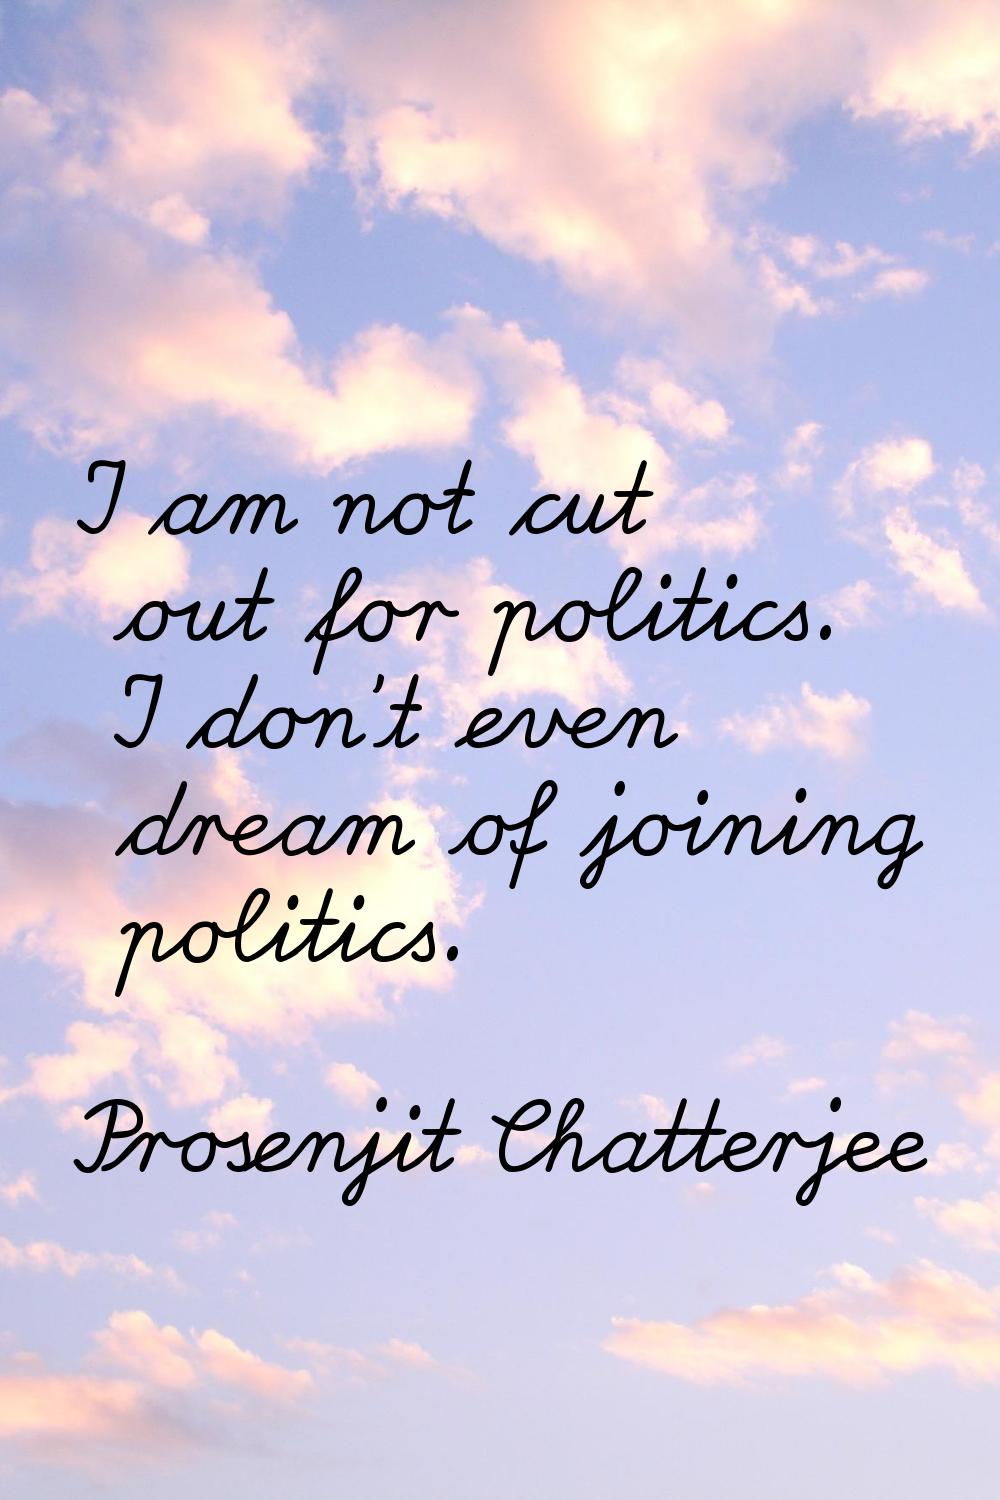 I am not cut out for politics. I don't even dream of joining politics.